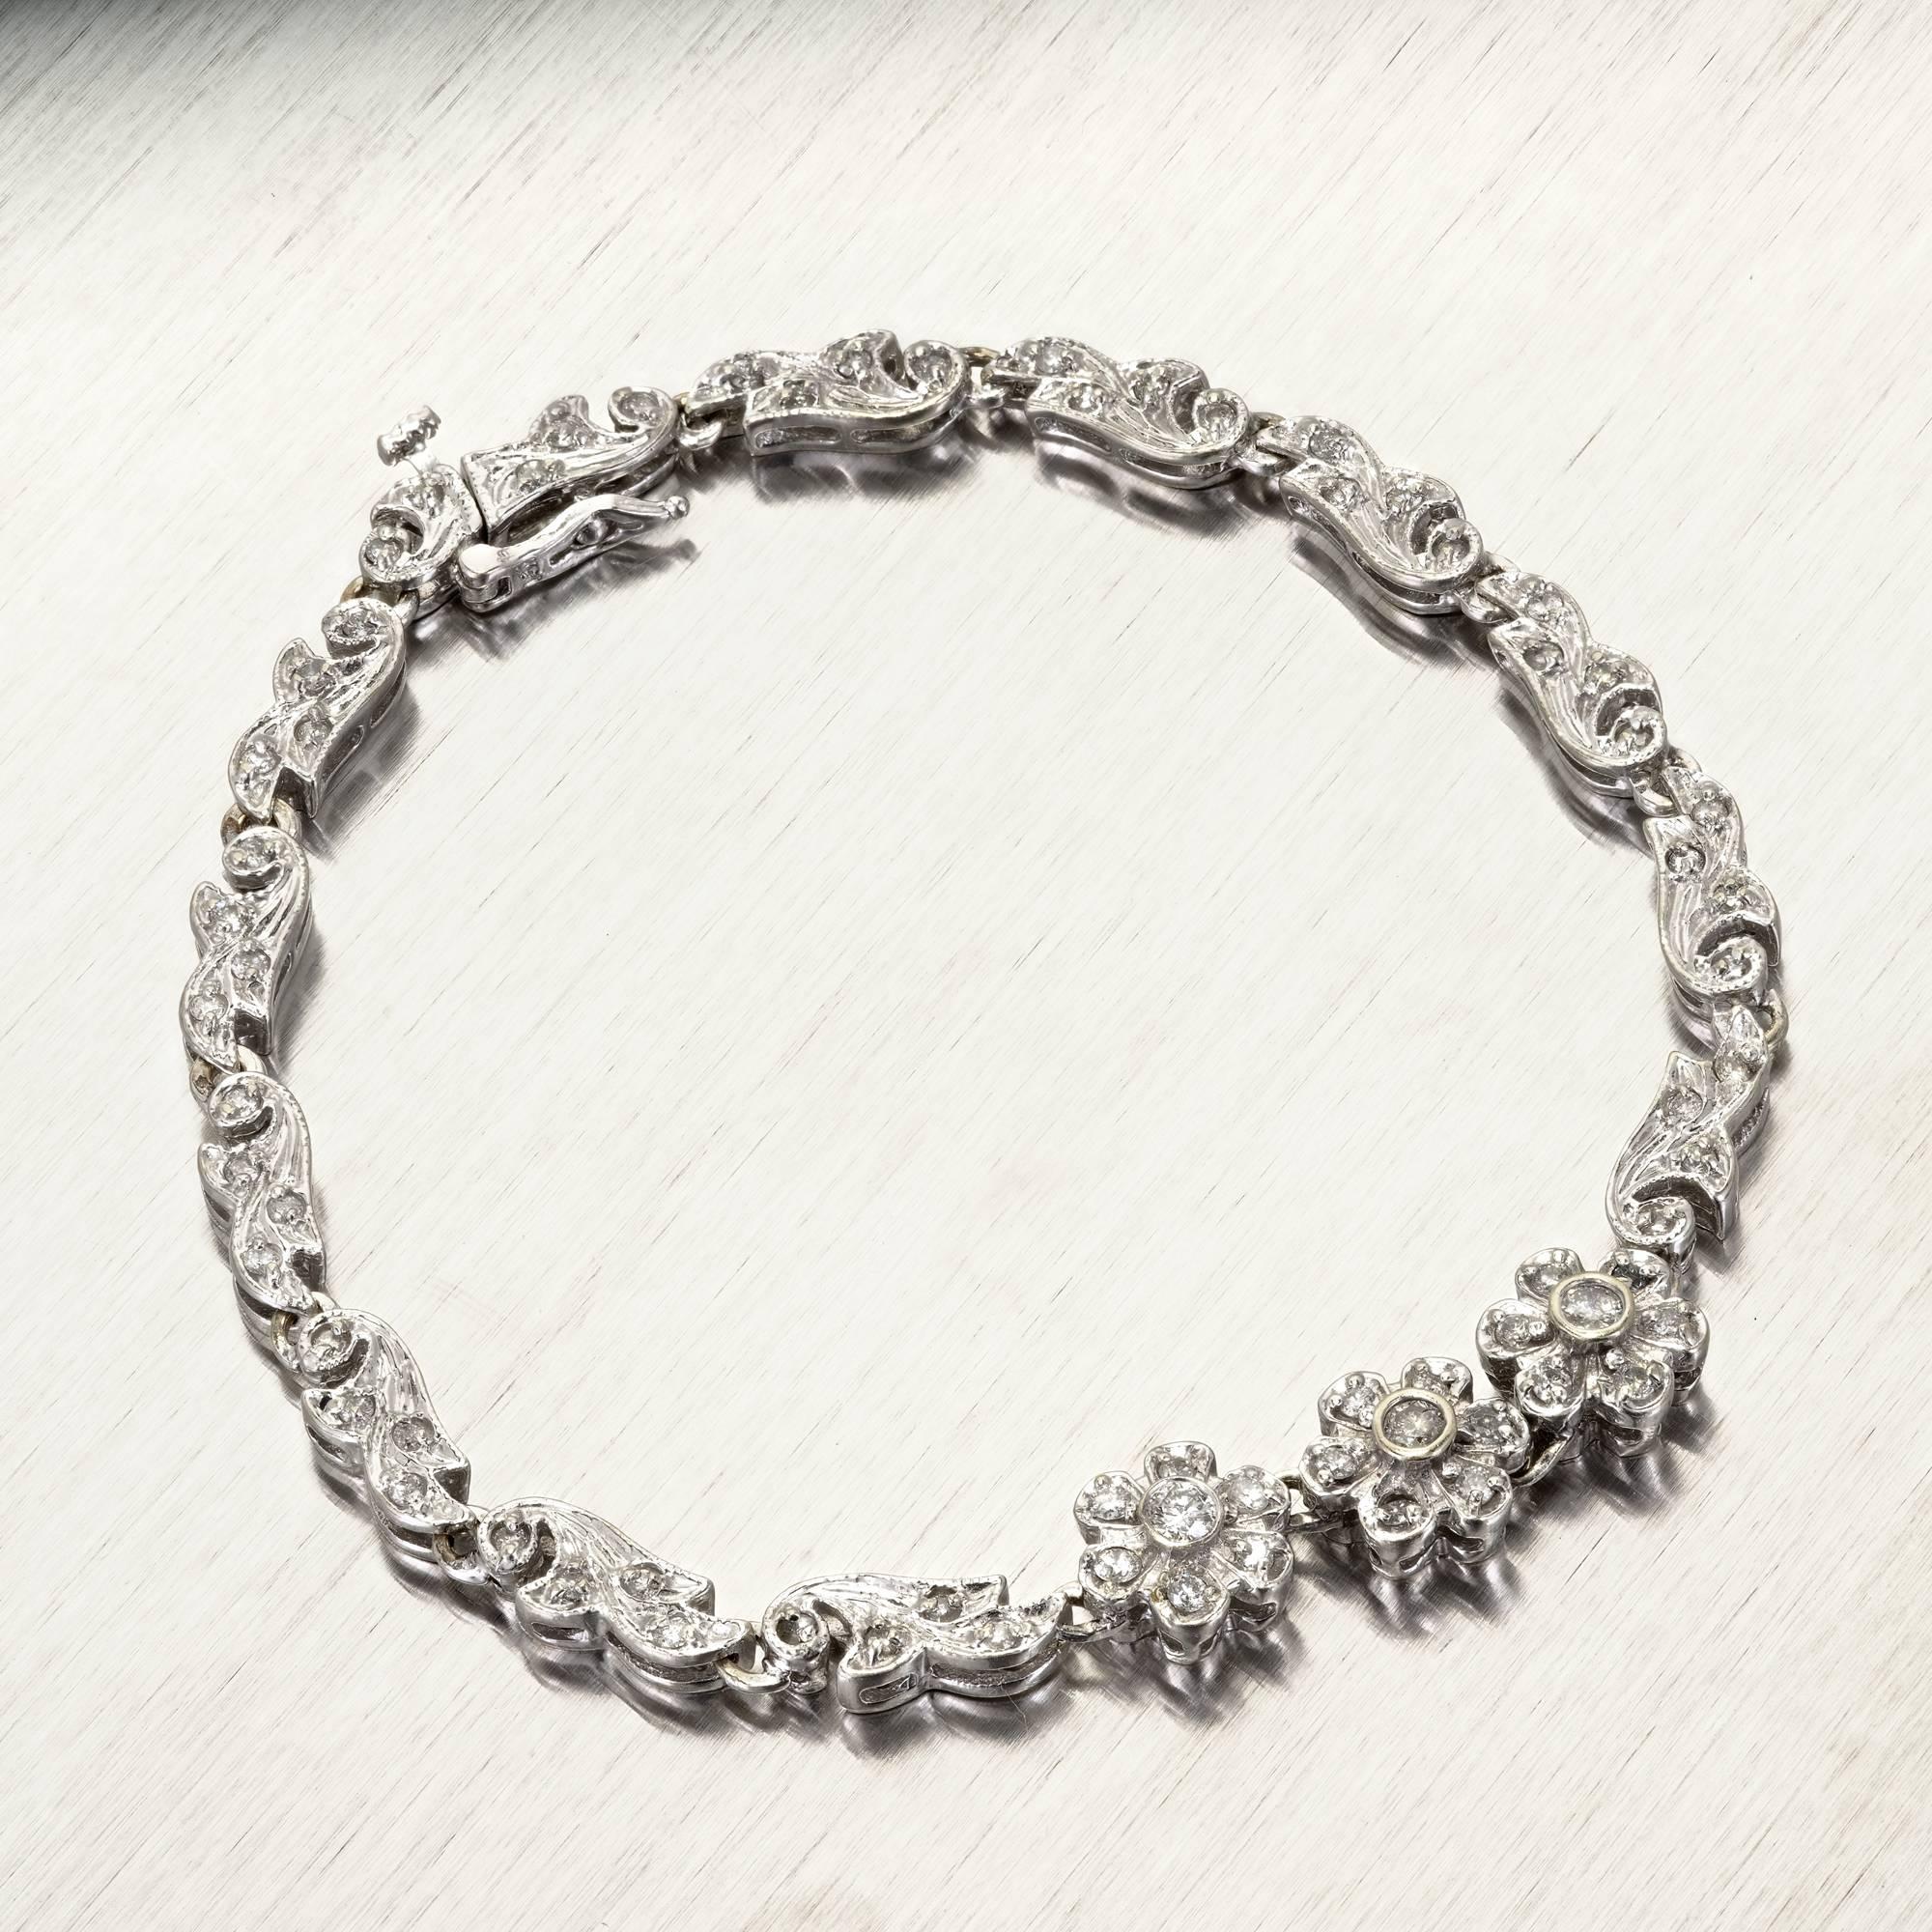 Hinged Swirl link diamond bracelet with flower design in the center. Set with a full cut diamonds. Circa 1960. 

3 round diamonds I SI-J Approximate total carat .12cts
70 round diamonds I SI-J Approximate total carat .56cts
12.2 grams
14k White